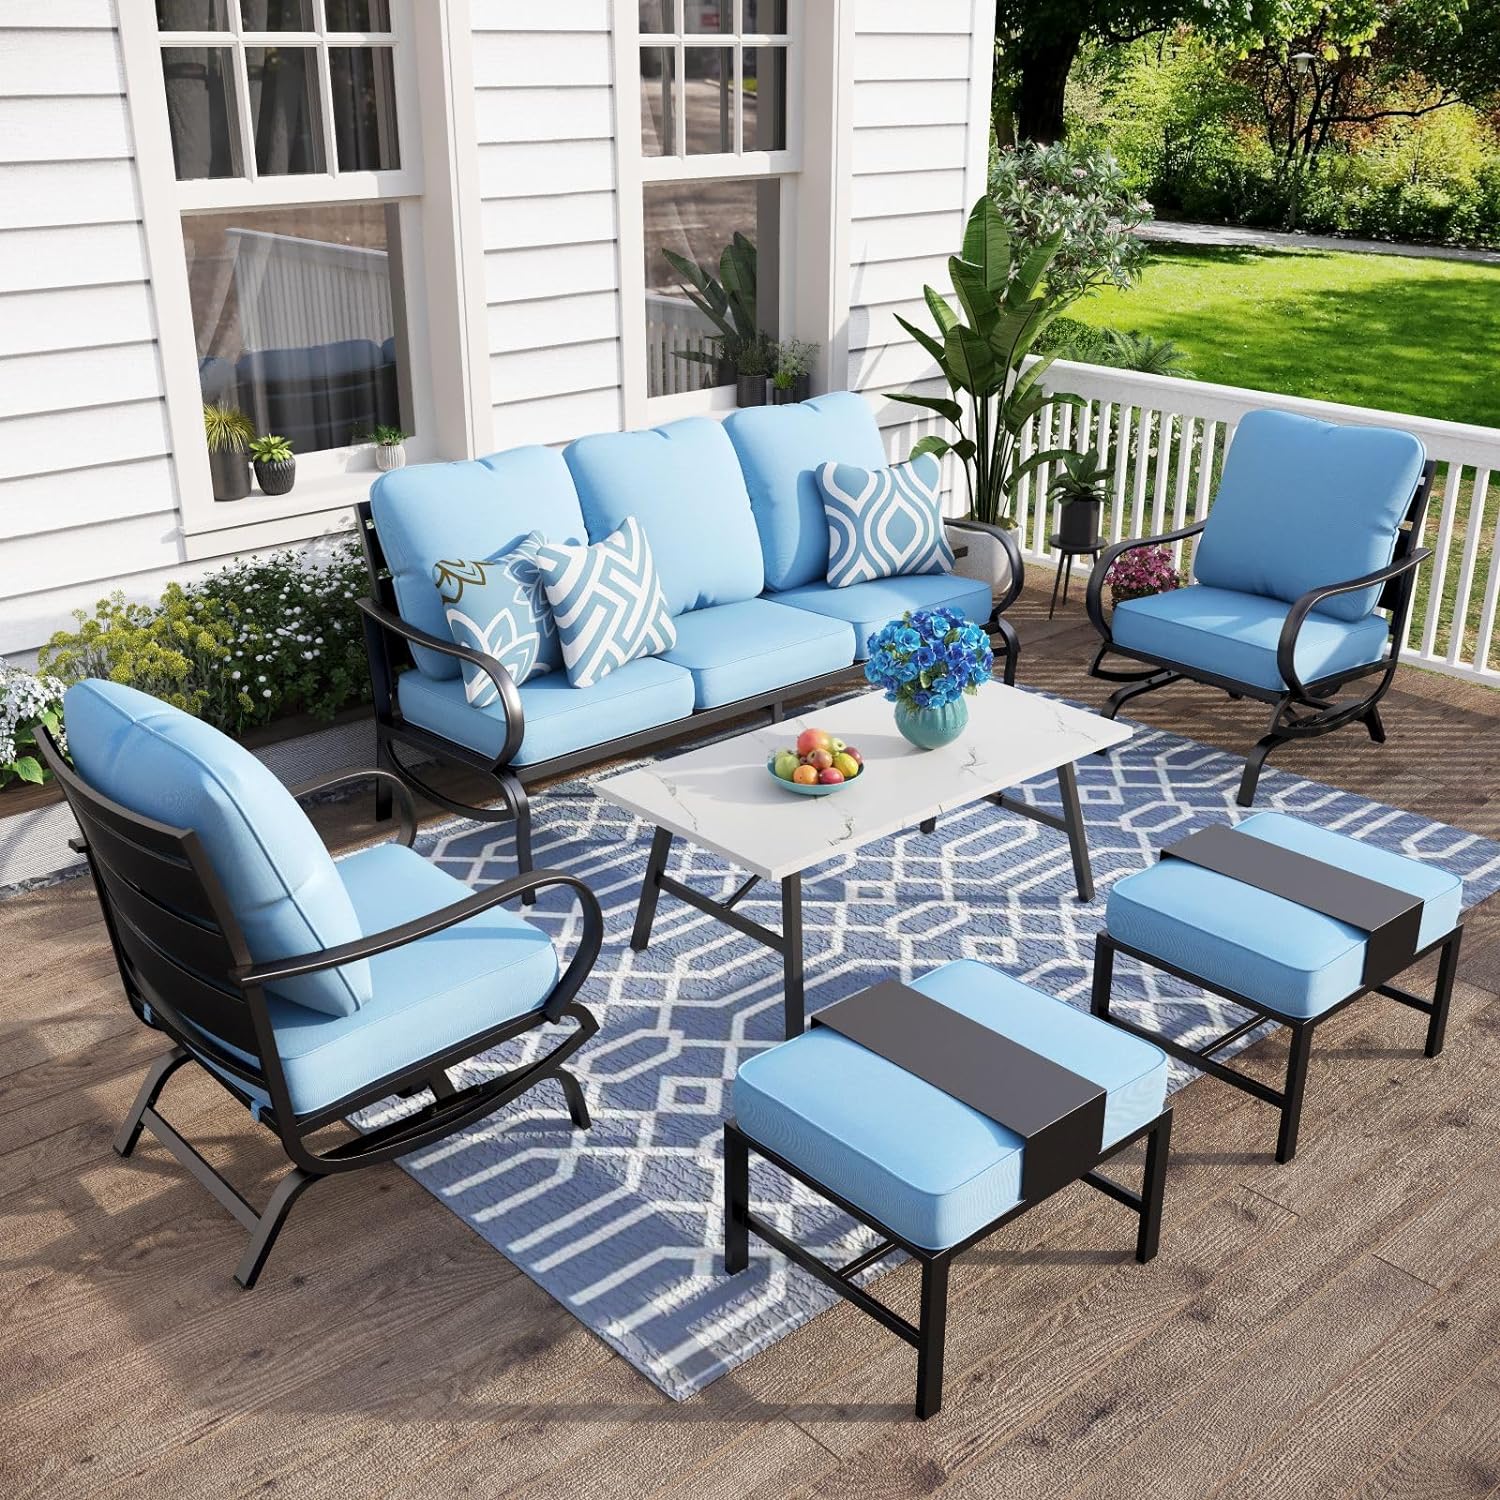 MFSTUDIO 6 Pieces Patio Conversation Sets(7 Seat),Outdoor Metal Furniture Sofas with 1 x 3-Seat Sofa,2 Rocking Chairs,2 Ottoman and & 1 Coffee Table,Wrought Iron Frame with Blue Cushion